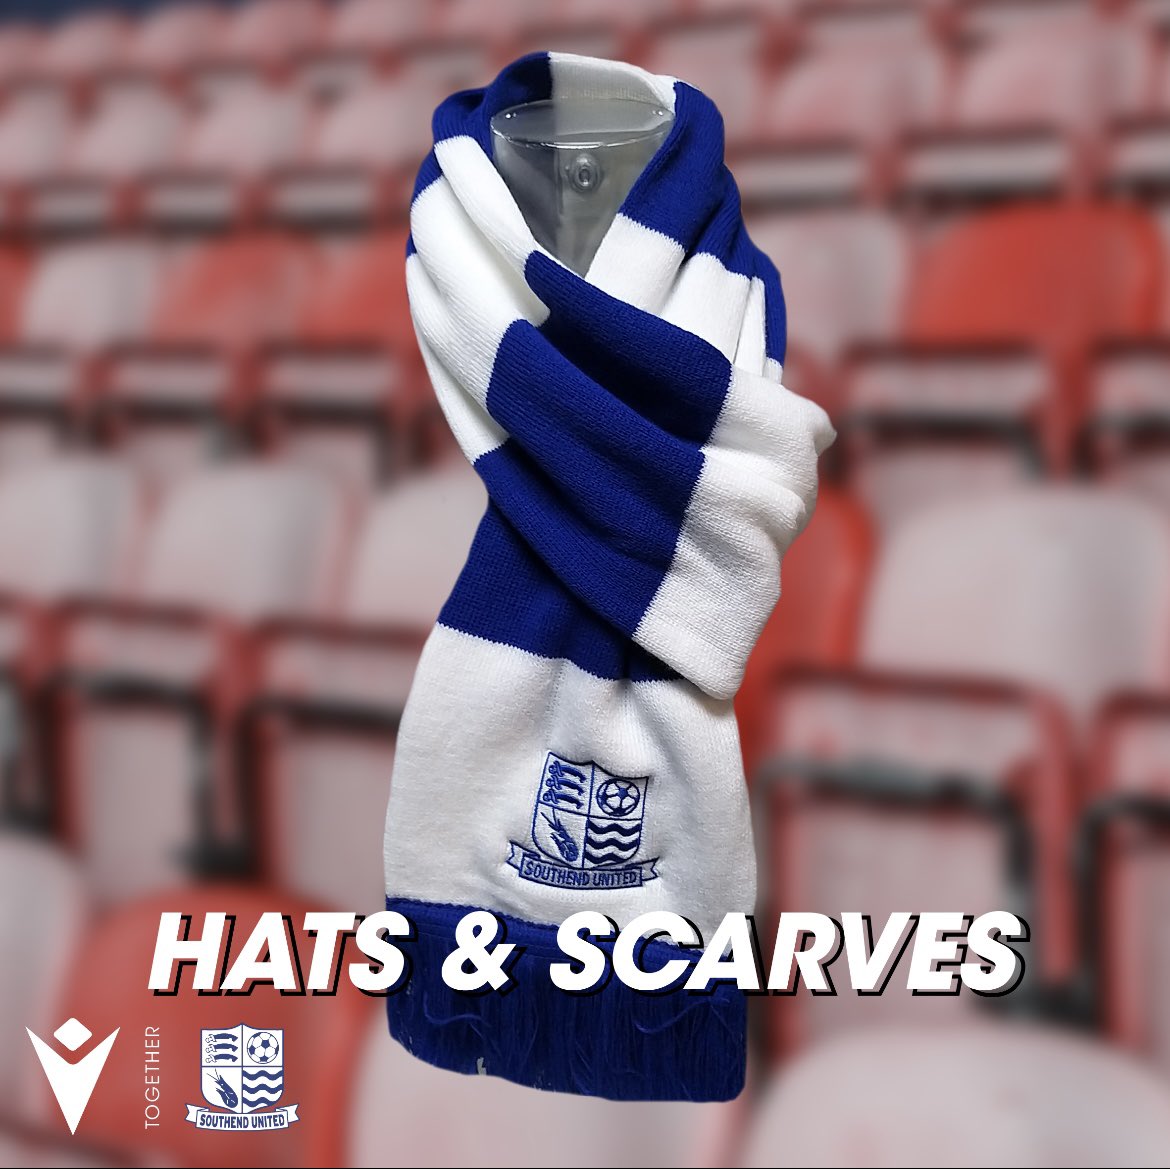 The Royal/White scarf is back! 🧣 The favourite Royal/White scarves are now available to purchase both in store and online 🔵⚪️ southendunitedmacronstore.co.uk